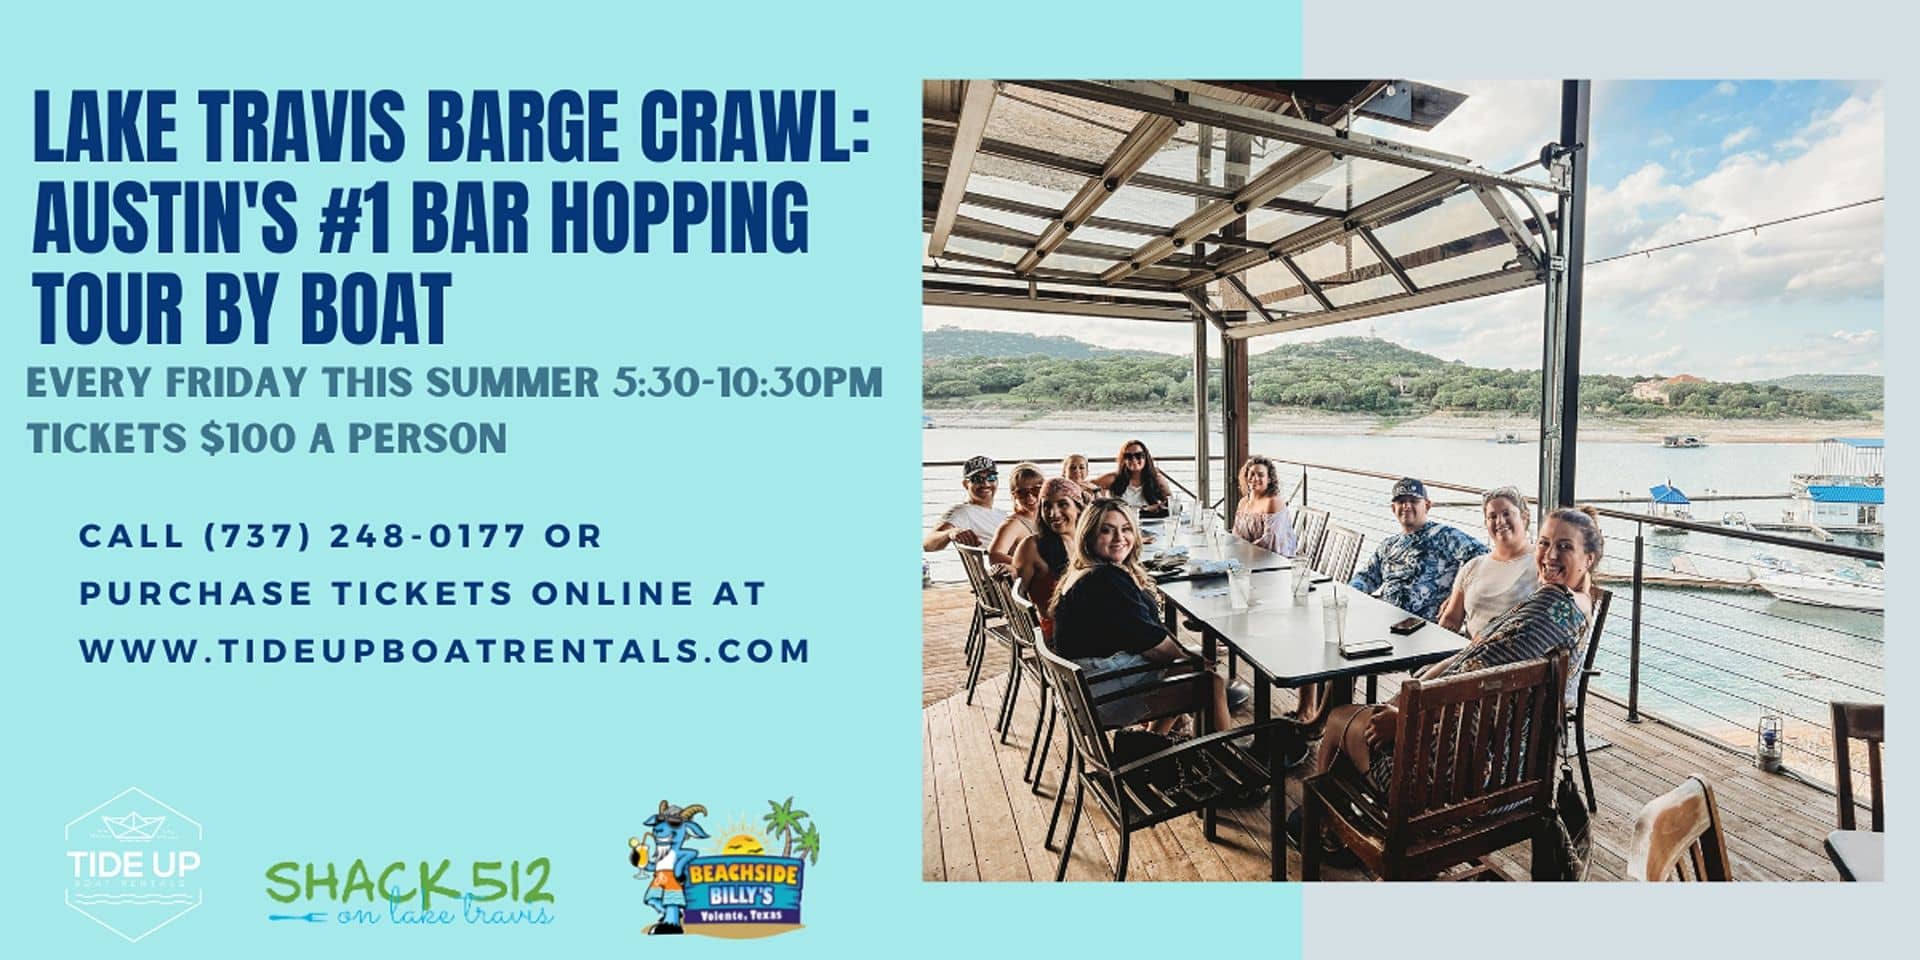 Flyer for Lake Travis barge crawl event